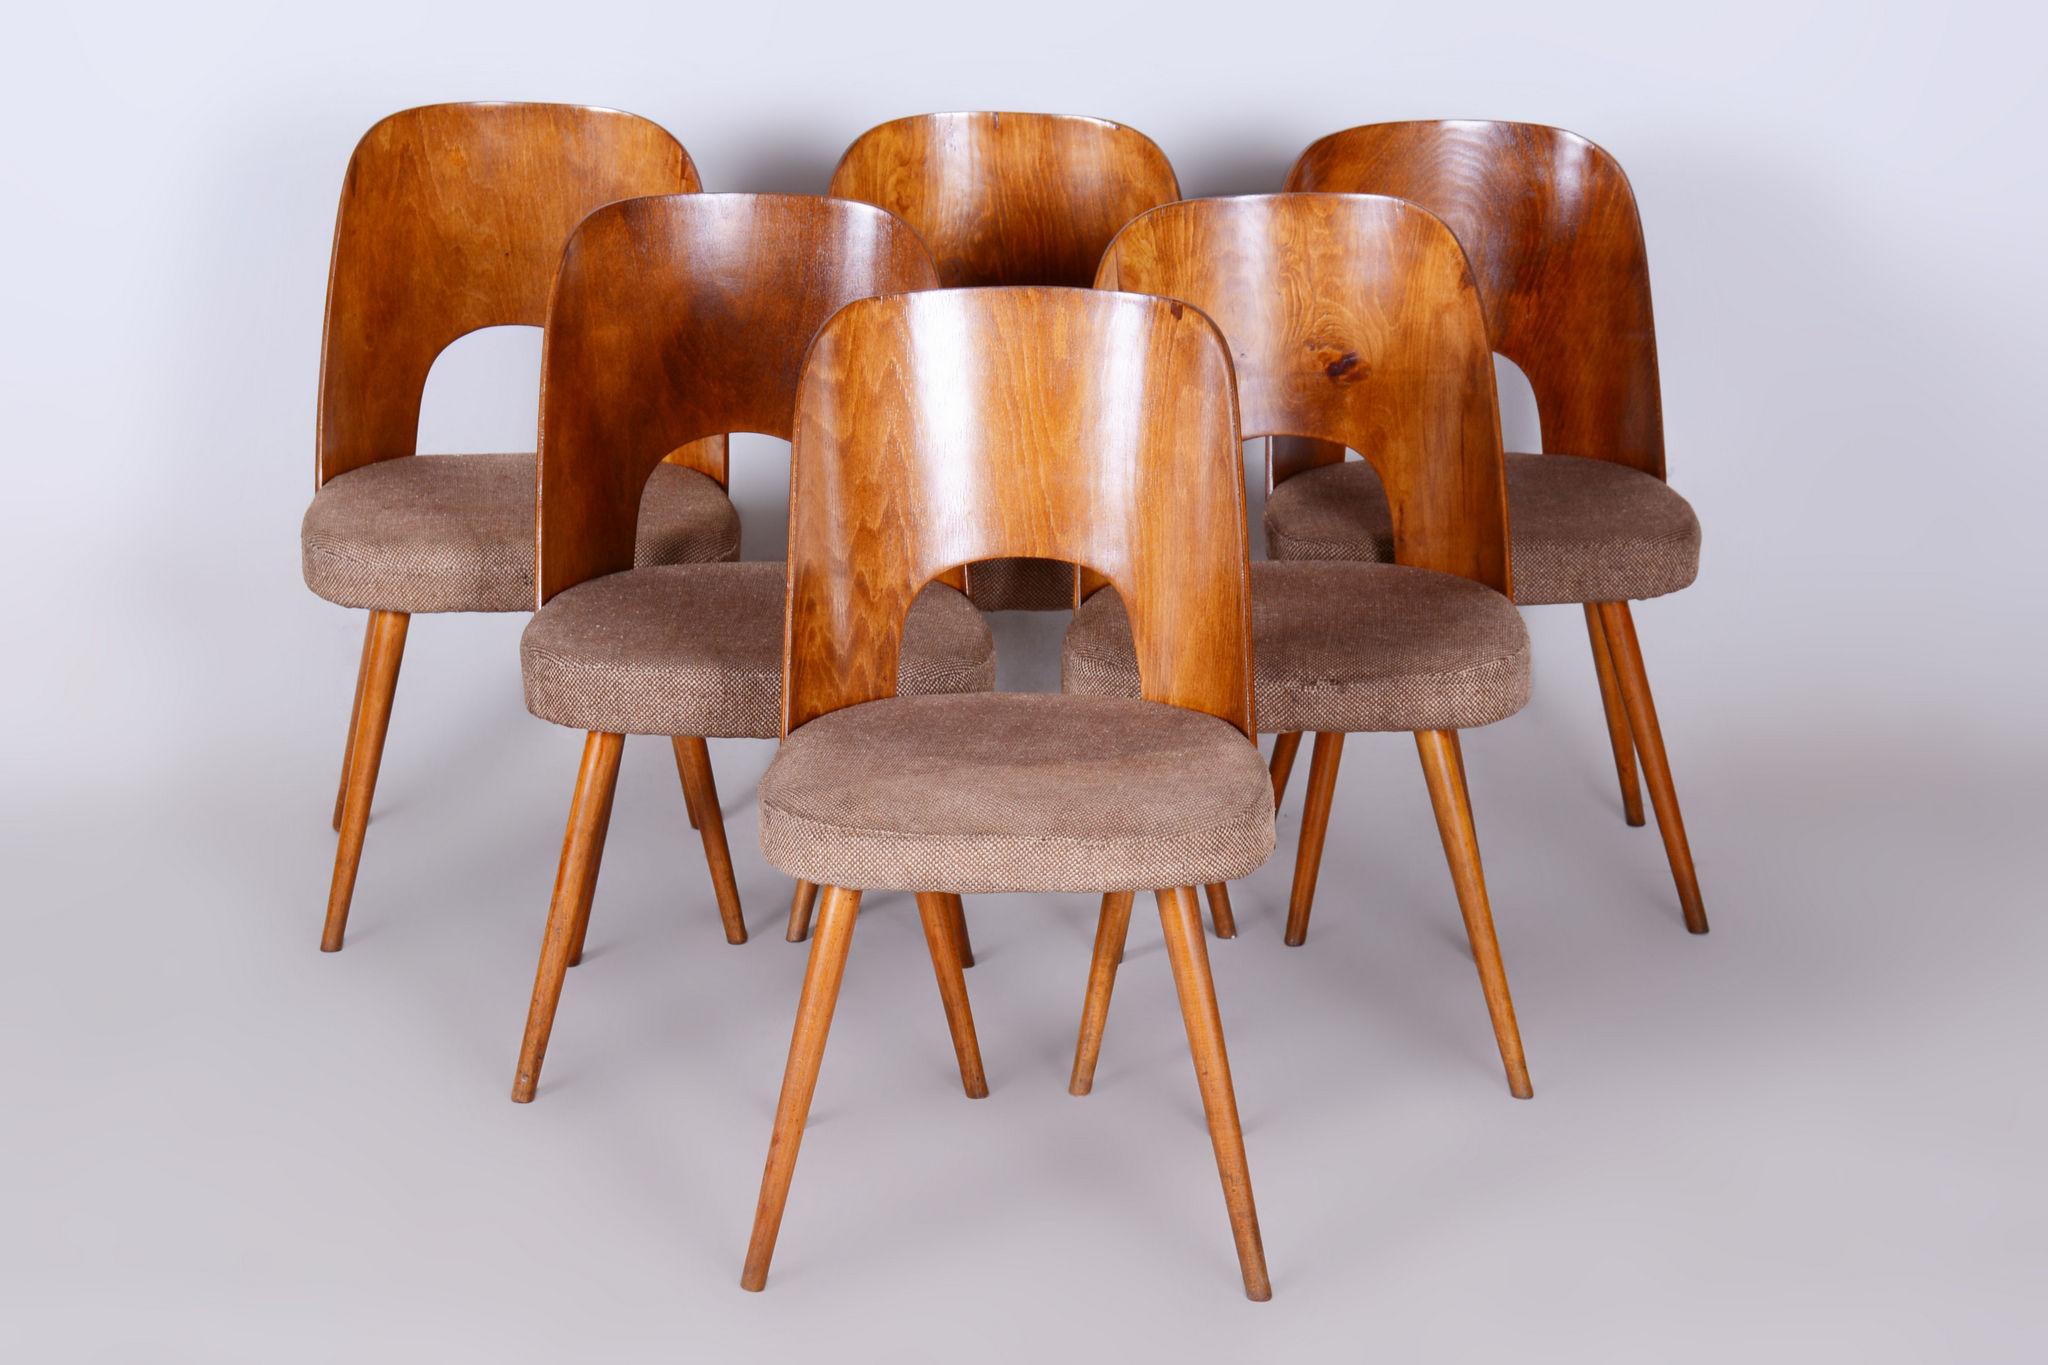 Set of six Mid-Century Modern chairs made in 1950s in Czechia. 

In pristine original condition, the upholstery has been professionally cleaned and its polish revived by our refurbushing team in Czechia. 

This item features Classic Mid-Century